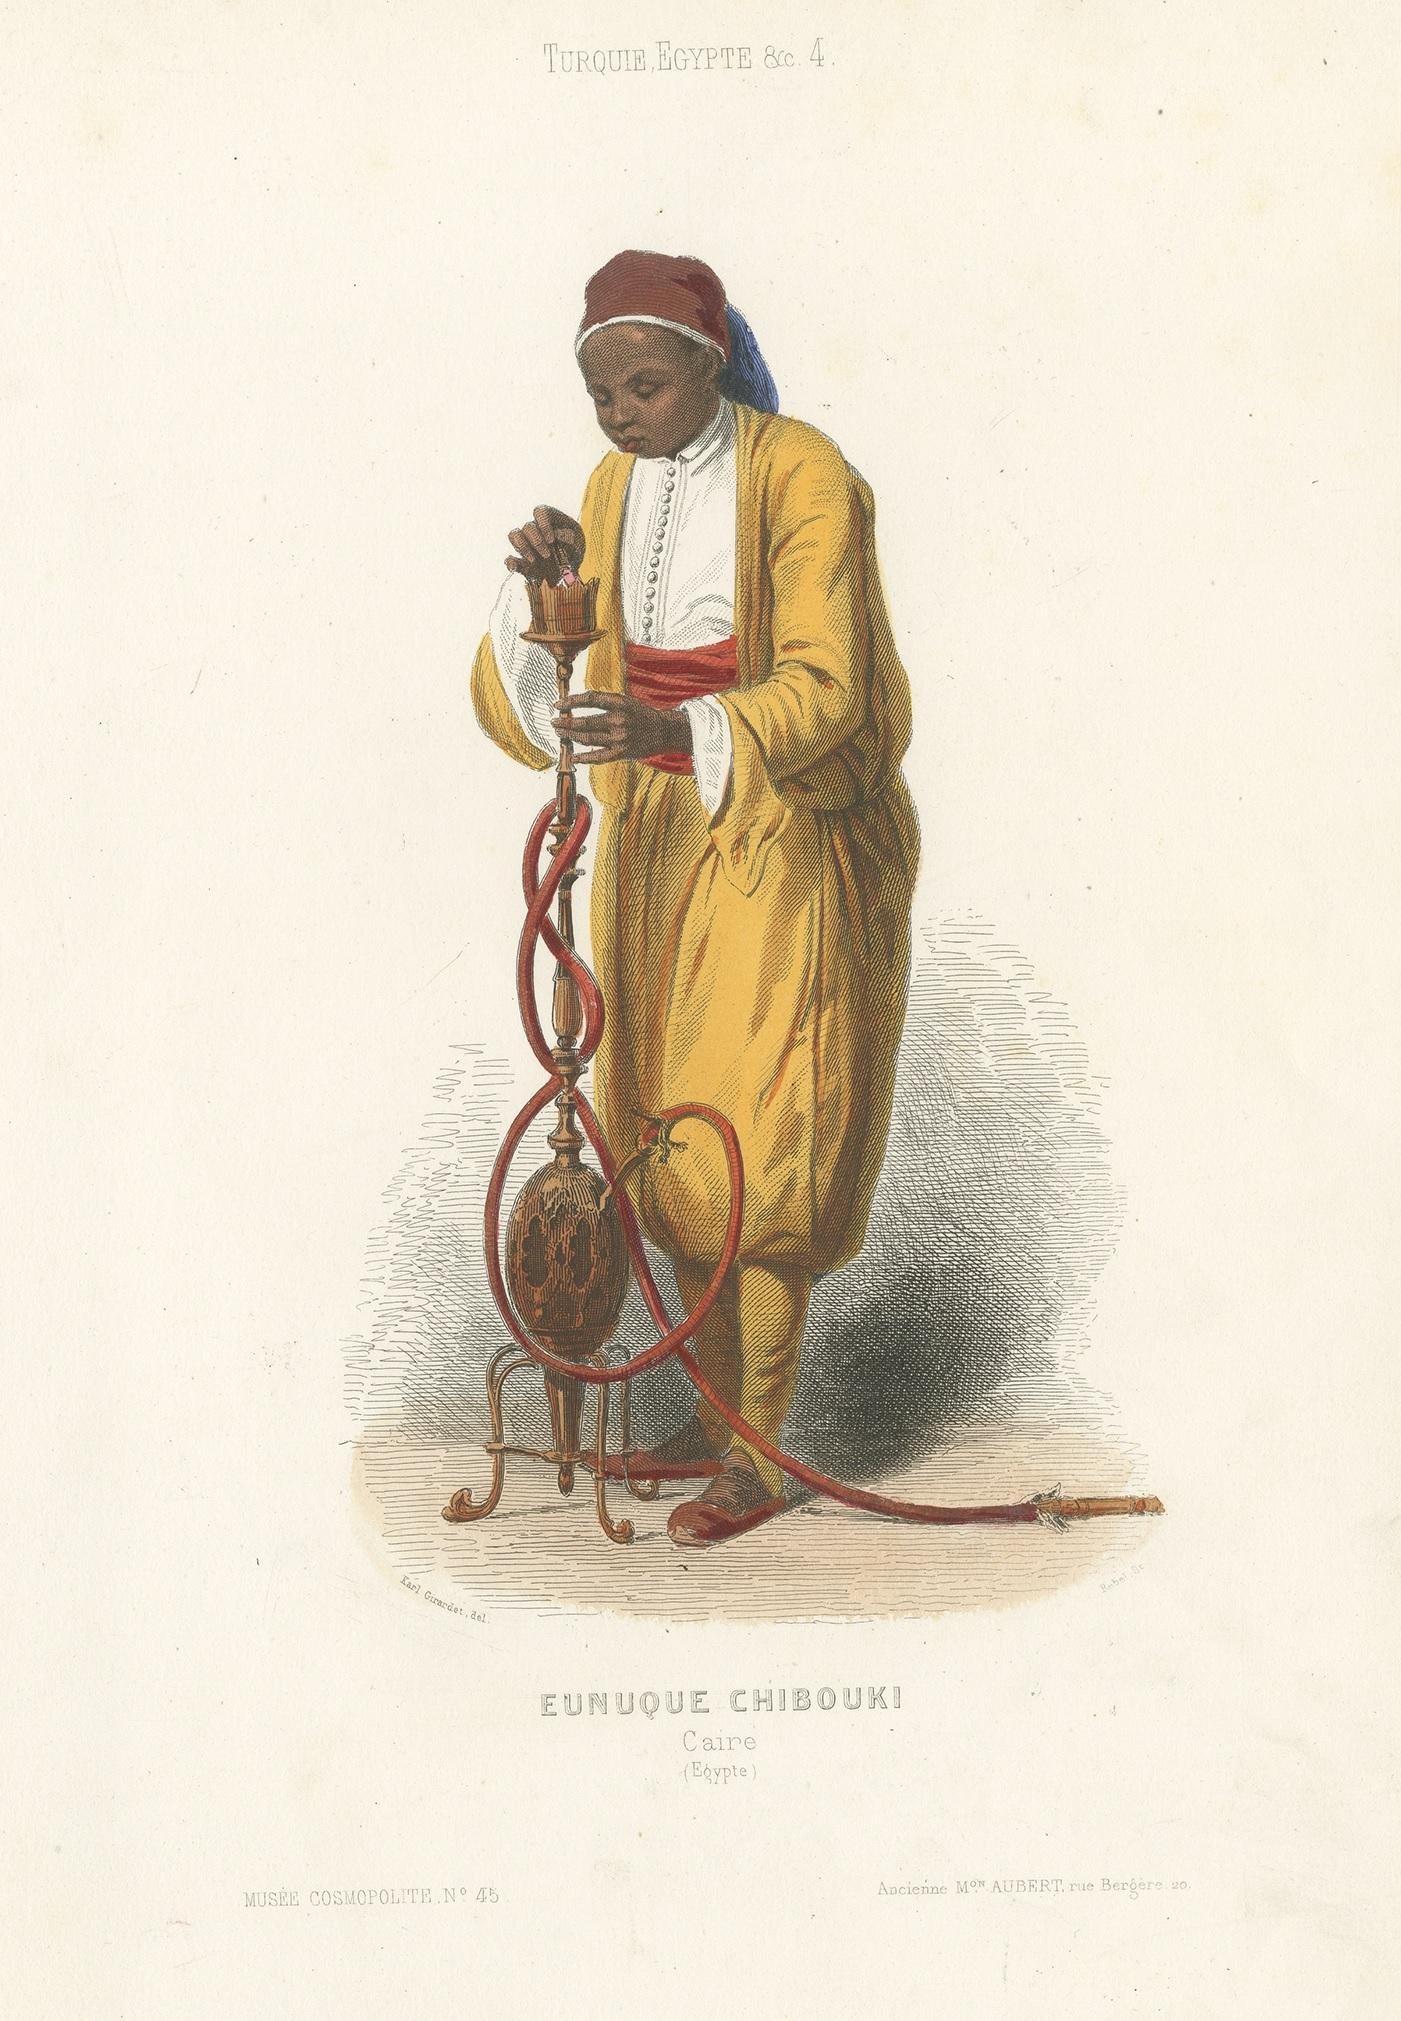 Antique costume print titled 'Eunuque Chibouki Caire (Egypte)'. Old print depicting an eunuch from Cairo, Egypt. The term eunuch generally refers to a man who has been castrated to serve a specific social function. This print originates from